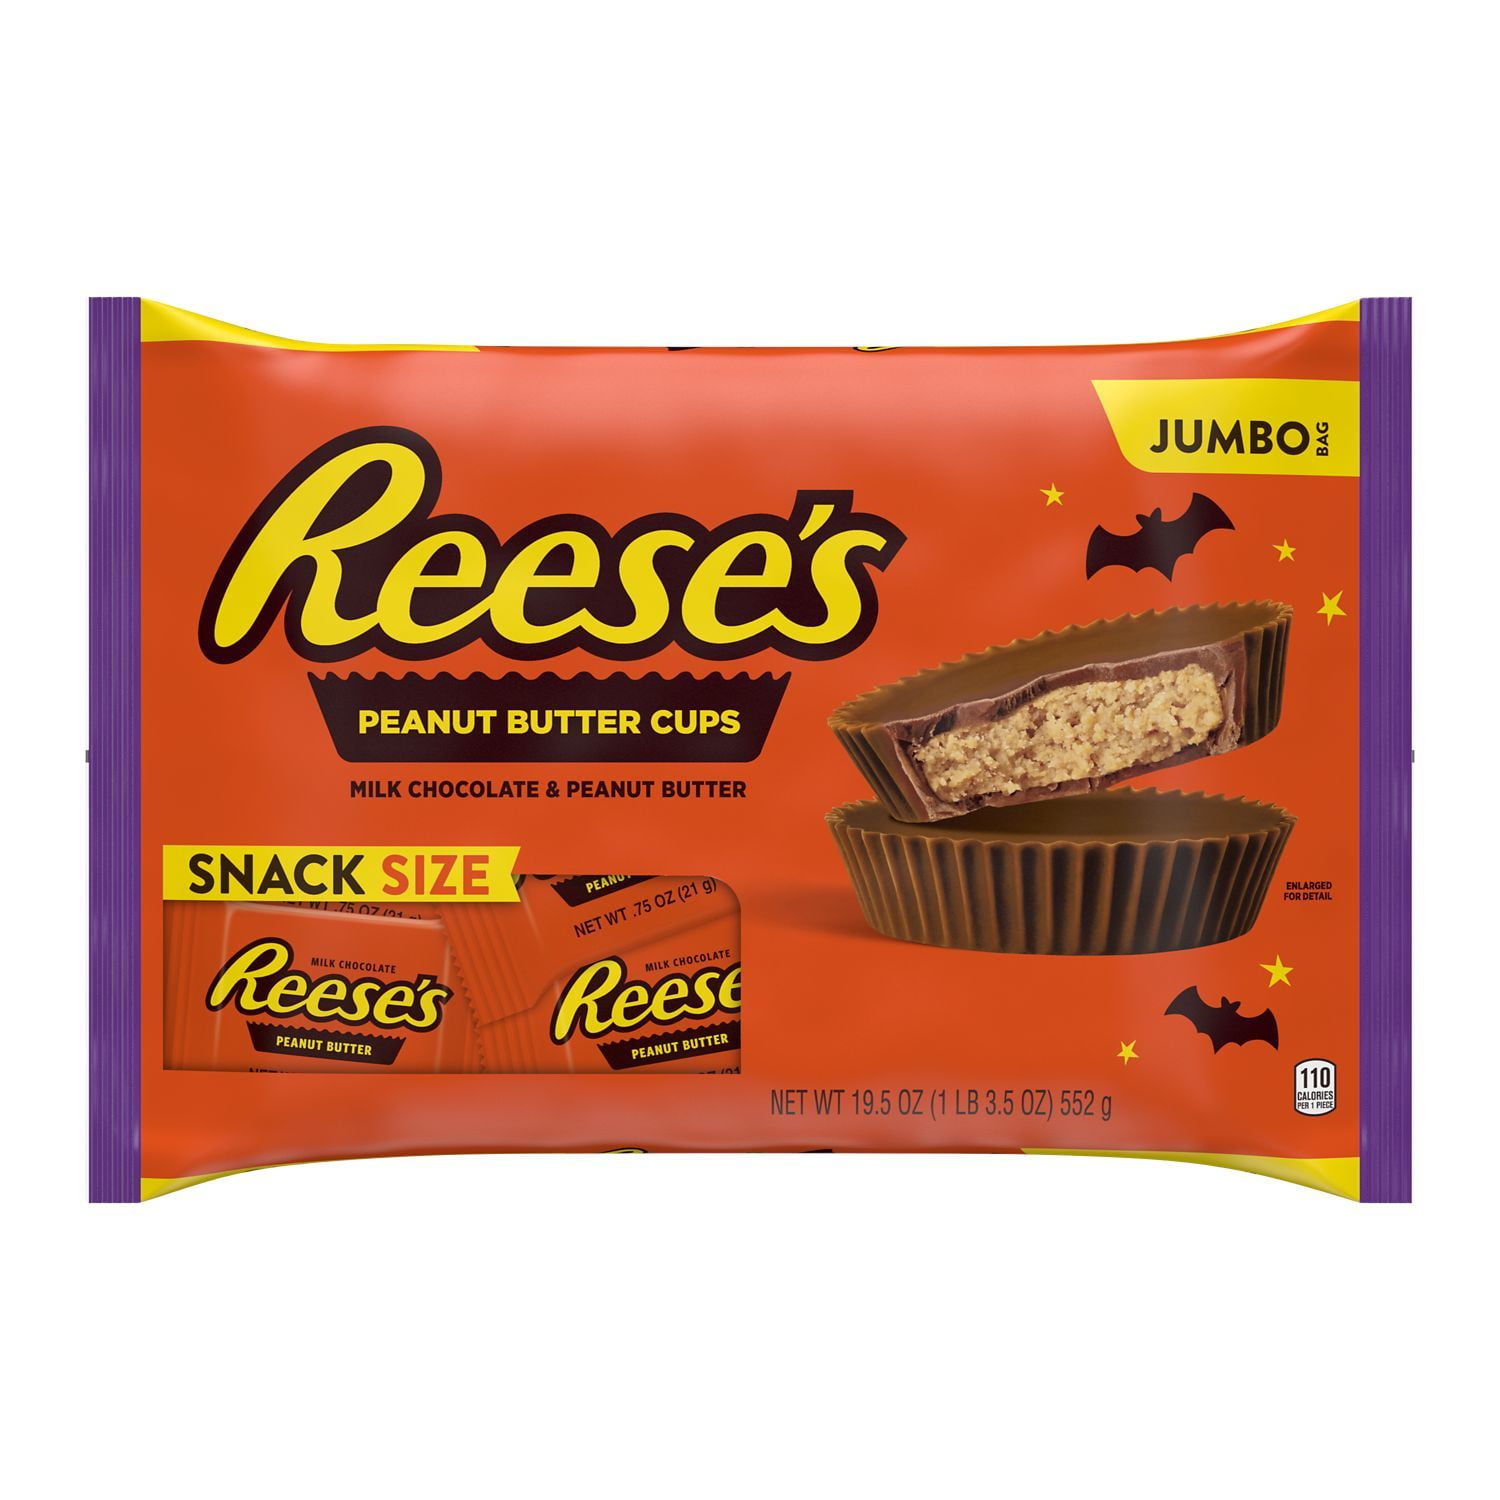 REESE'S, Milk Chocolate Peanut Butter Cups Snack Size Candy, Halloween, 19.5 oz, Jumbo Bag